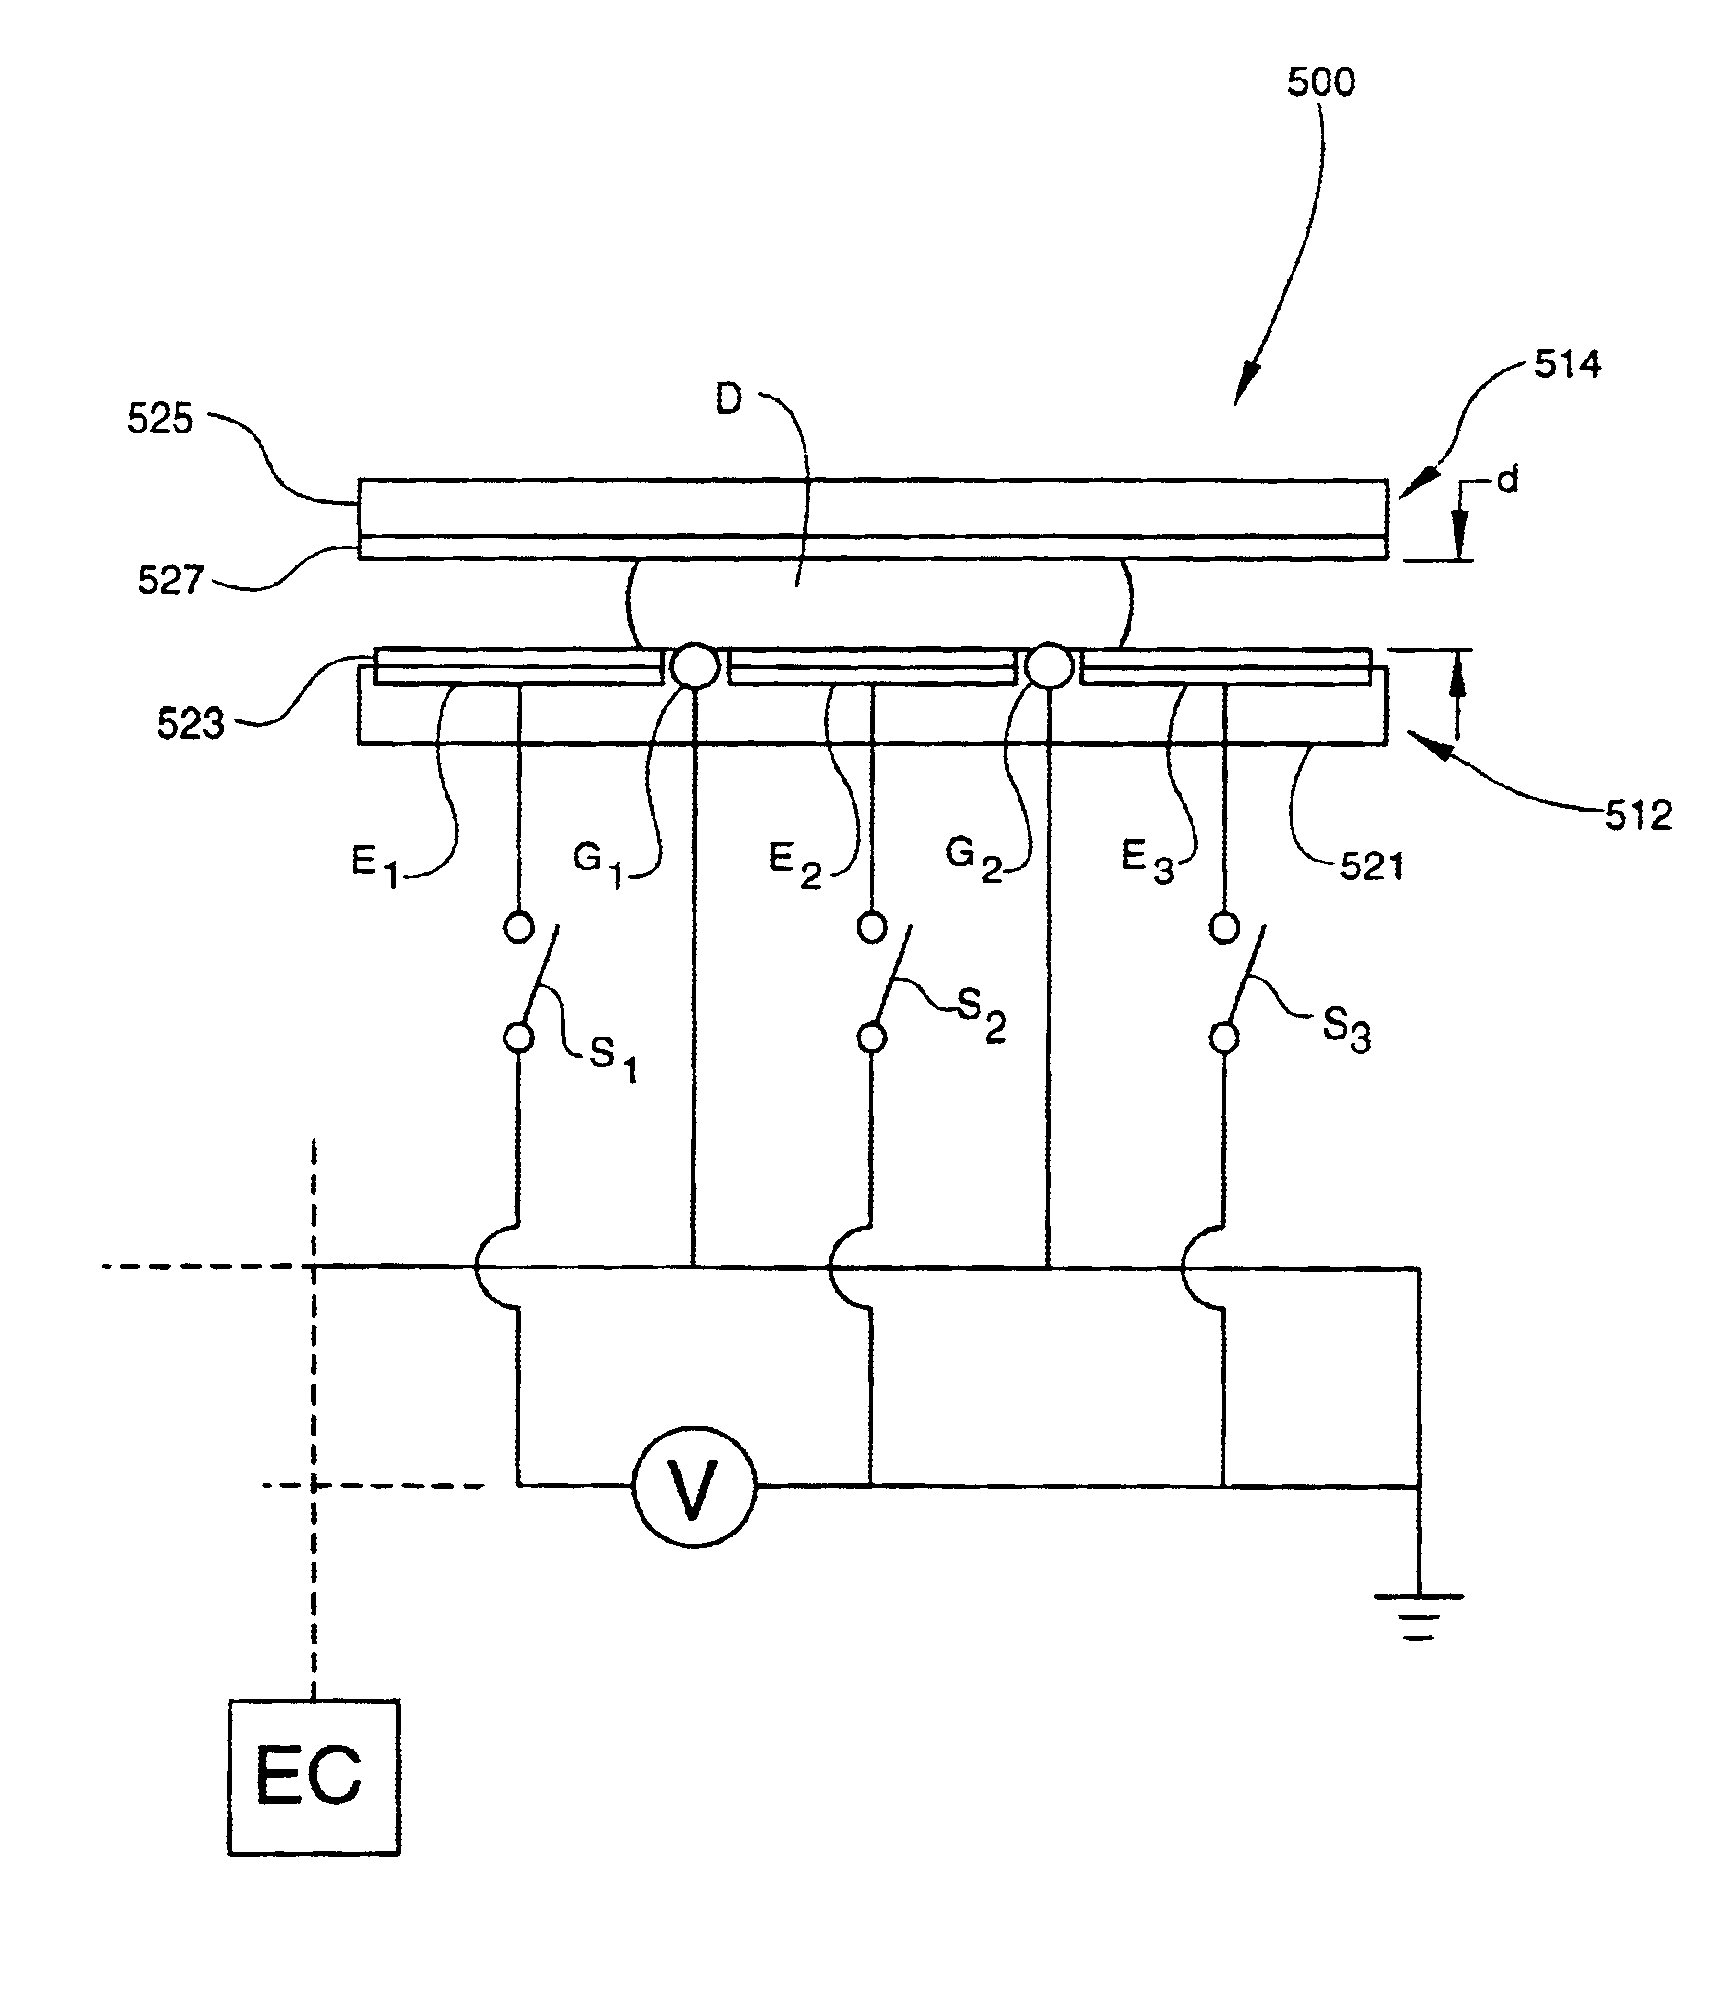 Apparatus for manipulating droplets by electrowetting-based techniques